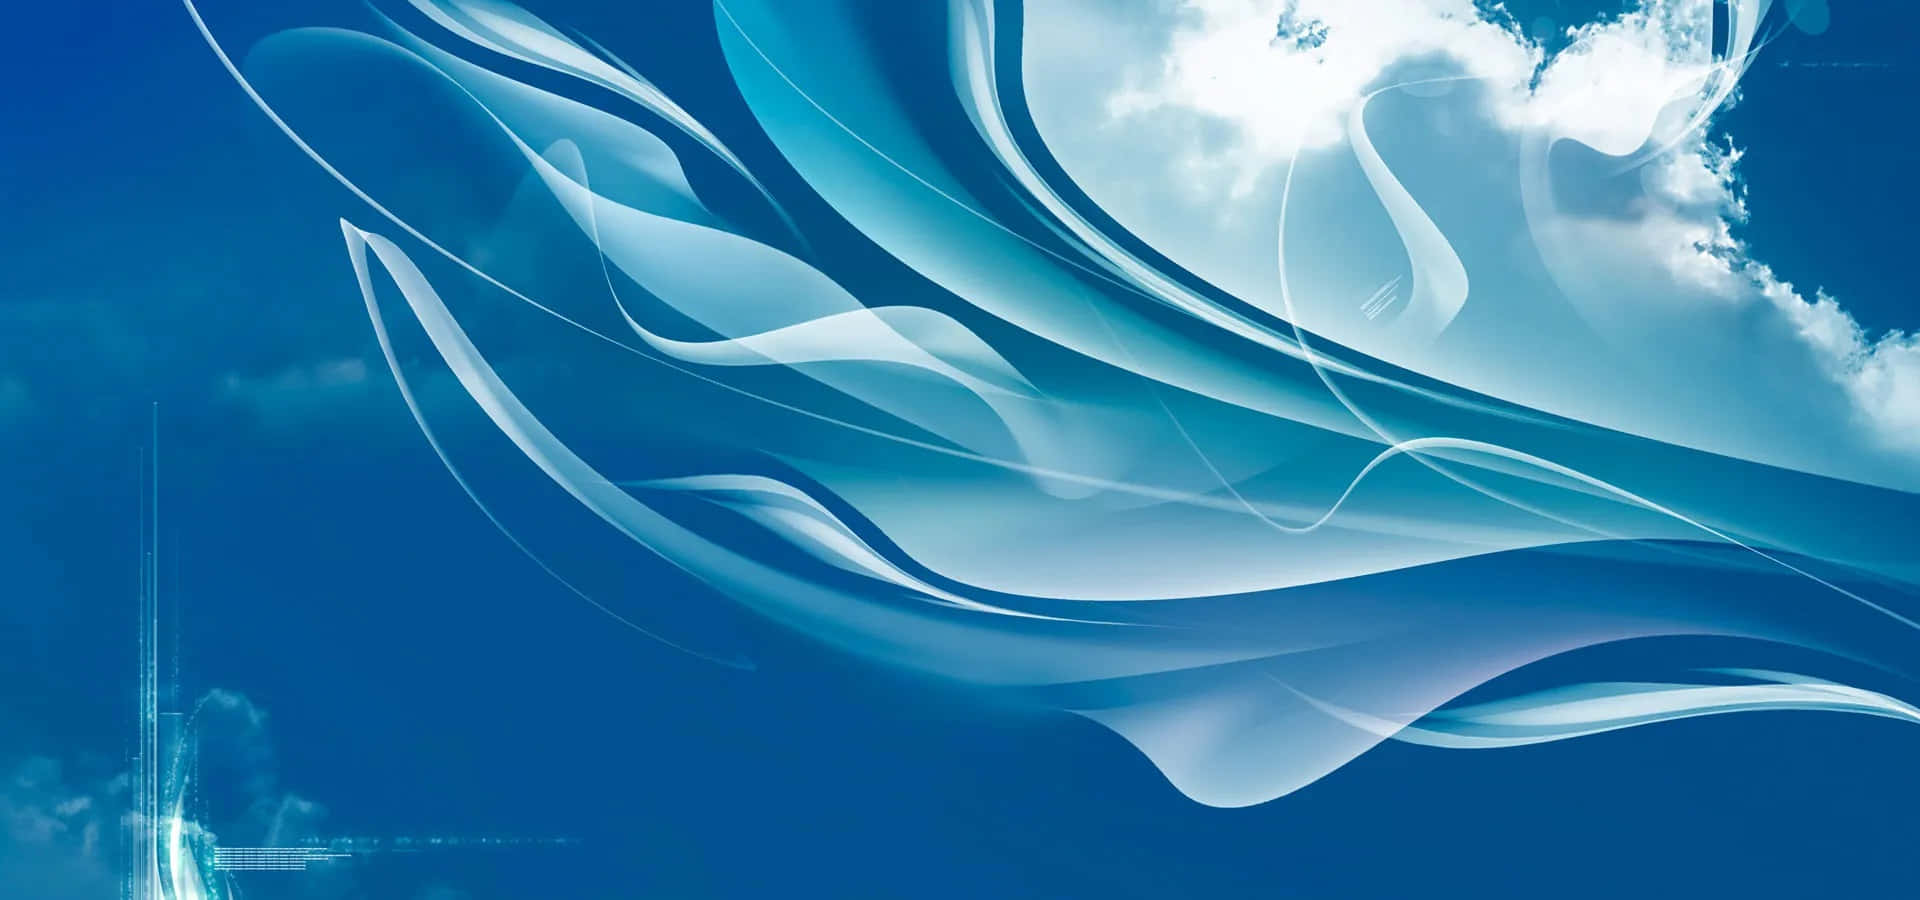 A Blue Abstract Background With A Cloud And Blue Sky